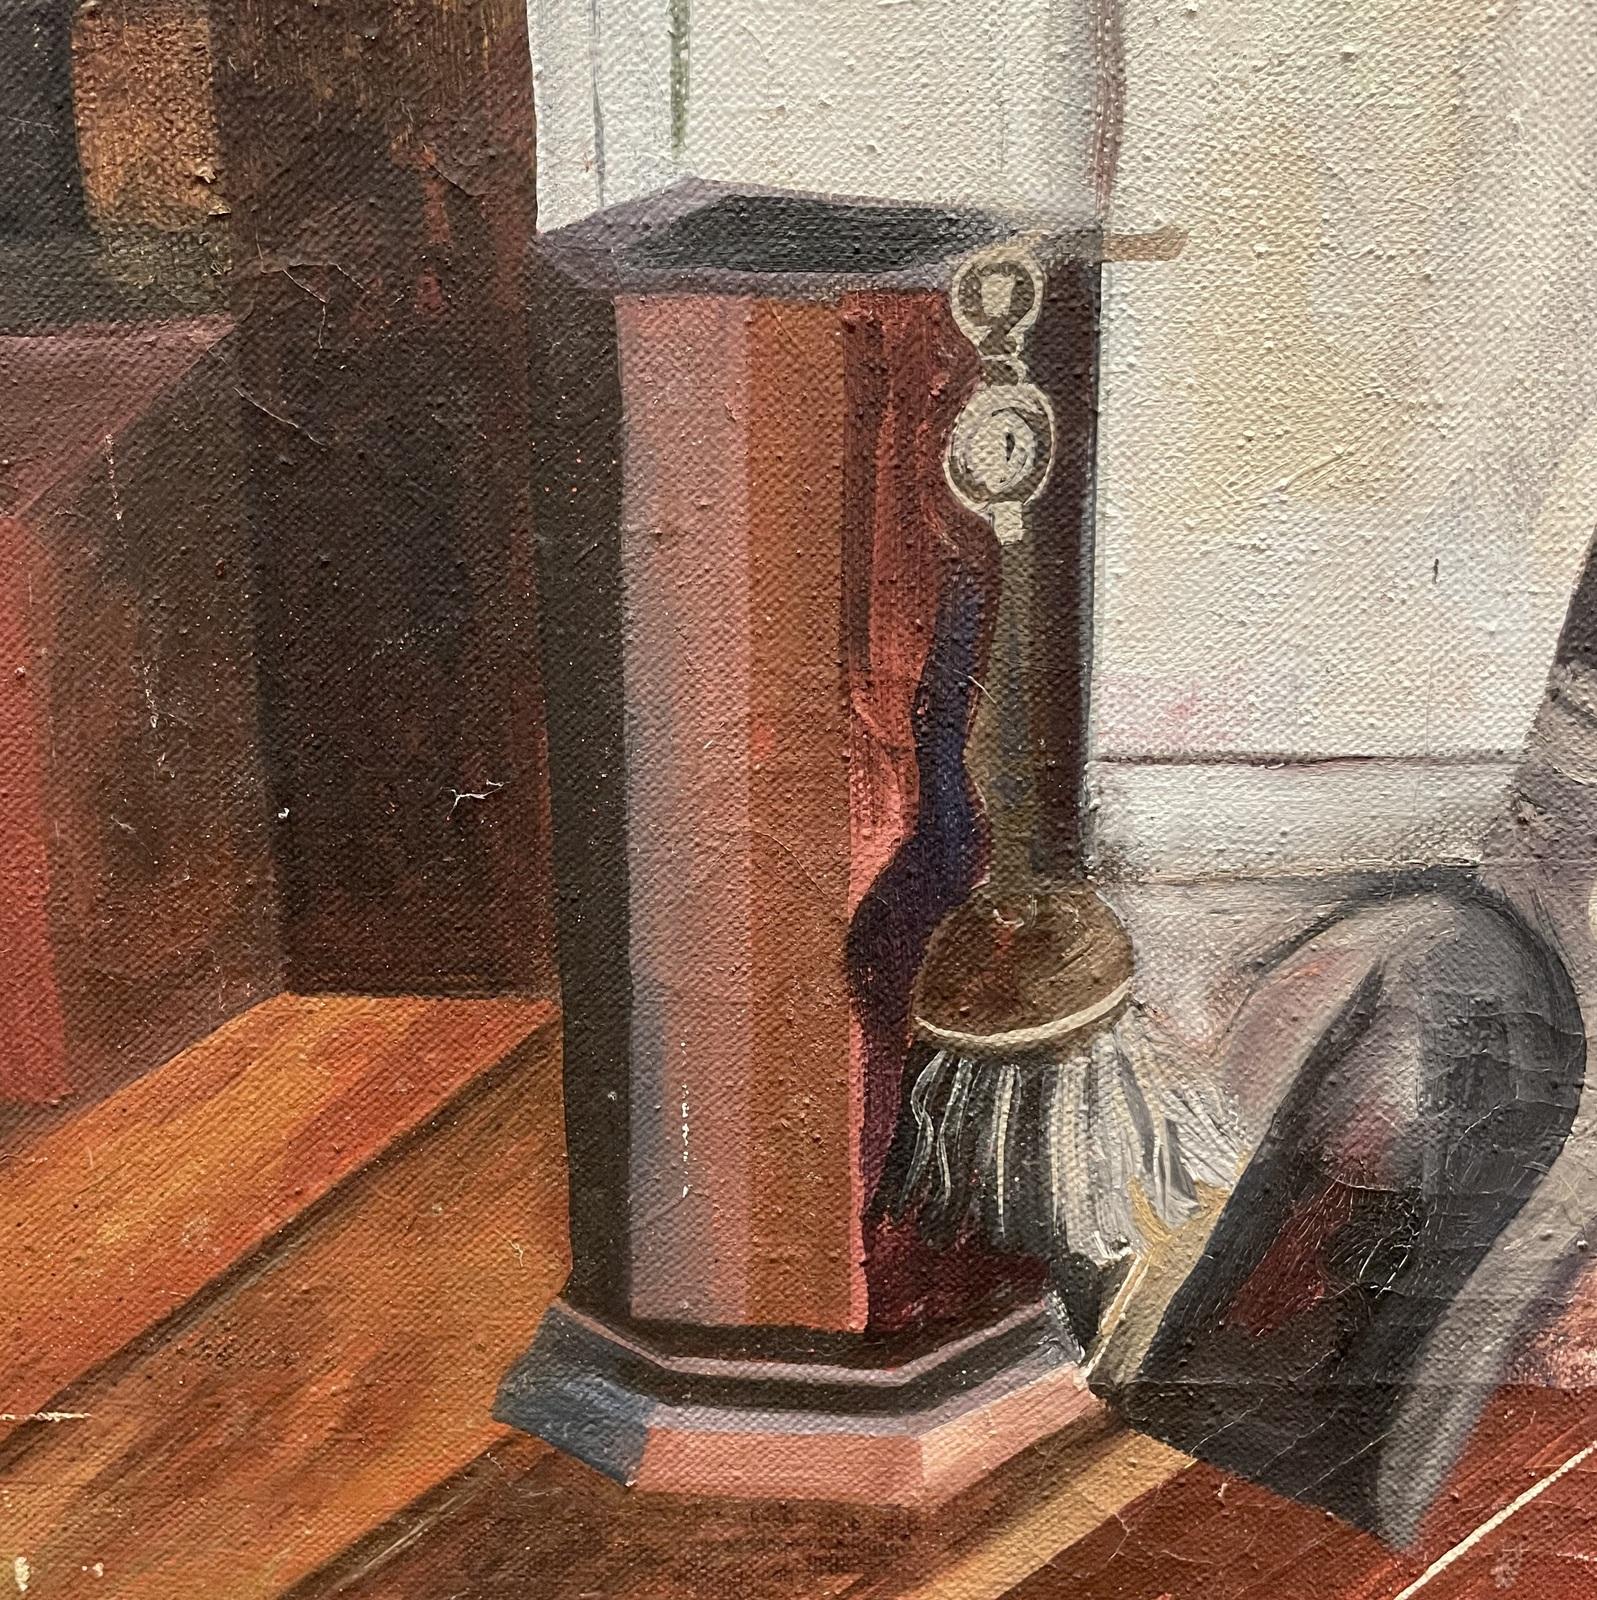 Judy Bibby (Brtish, 1947-2021), Fireplace in St Margarets, oil on canvas. Provenance: from the artist's estate. 30% of the proceeds from the sale will be donated to raise money for a bursary for a first-year art student from Liverpool to study at